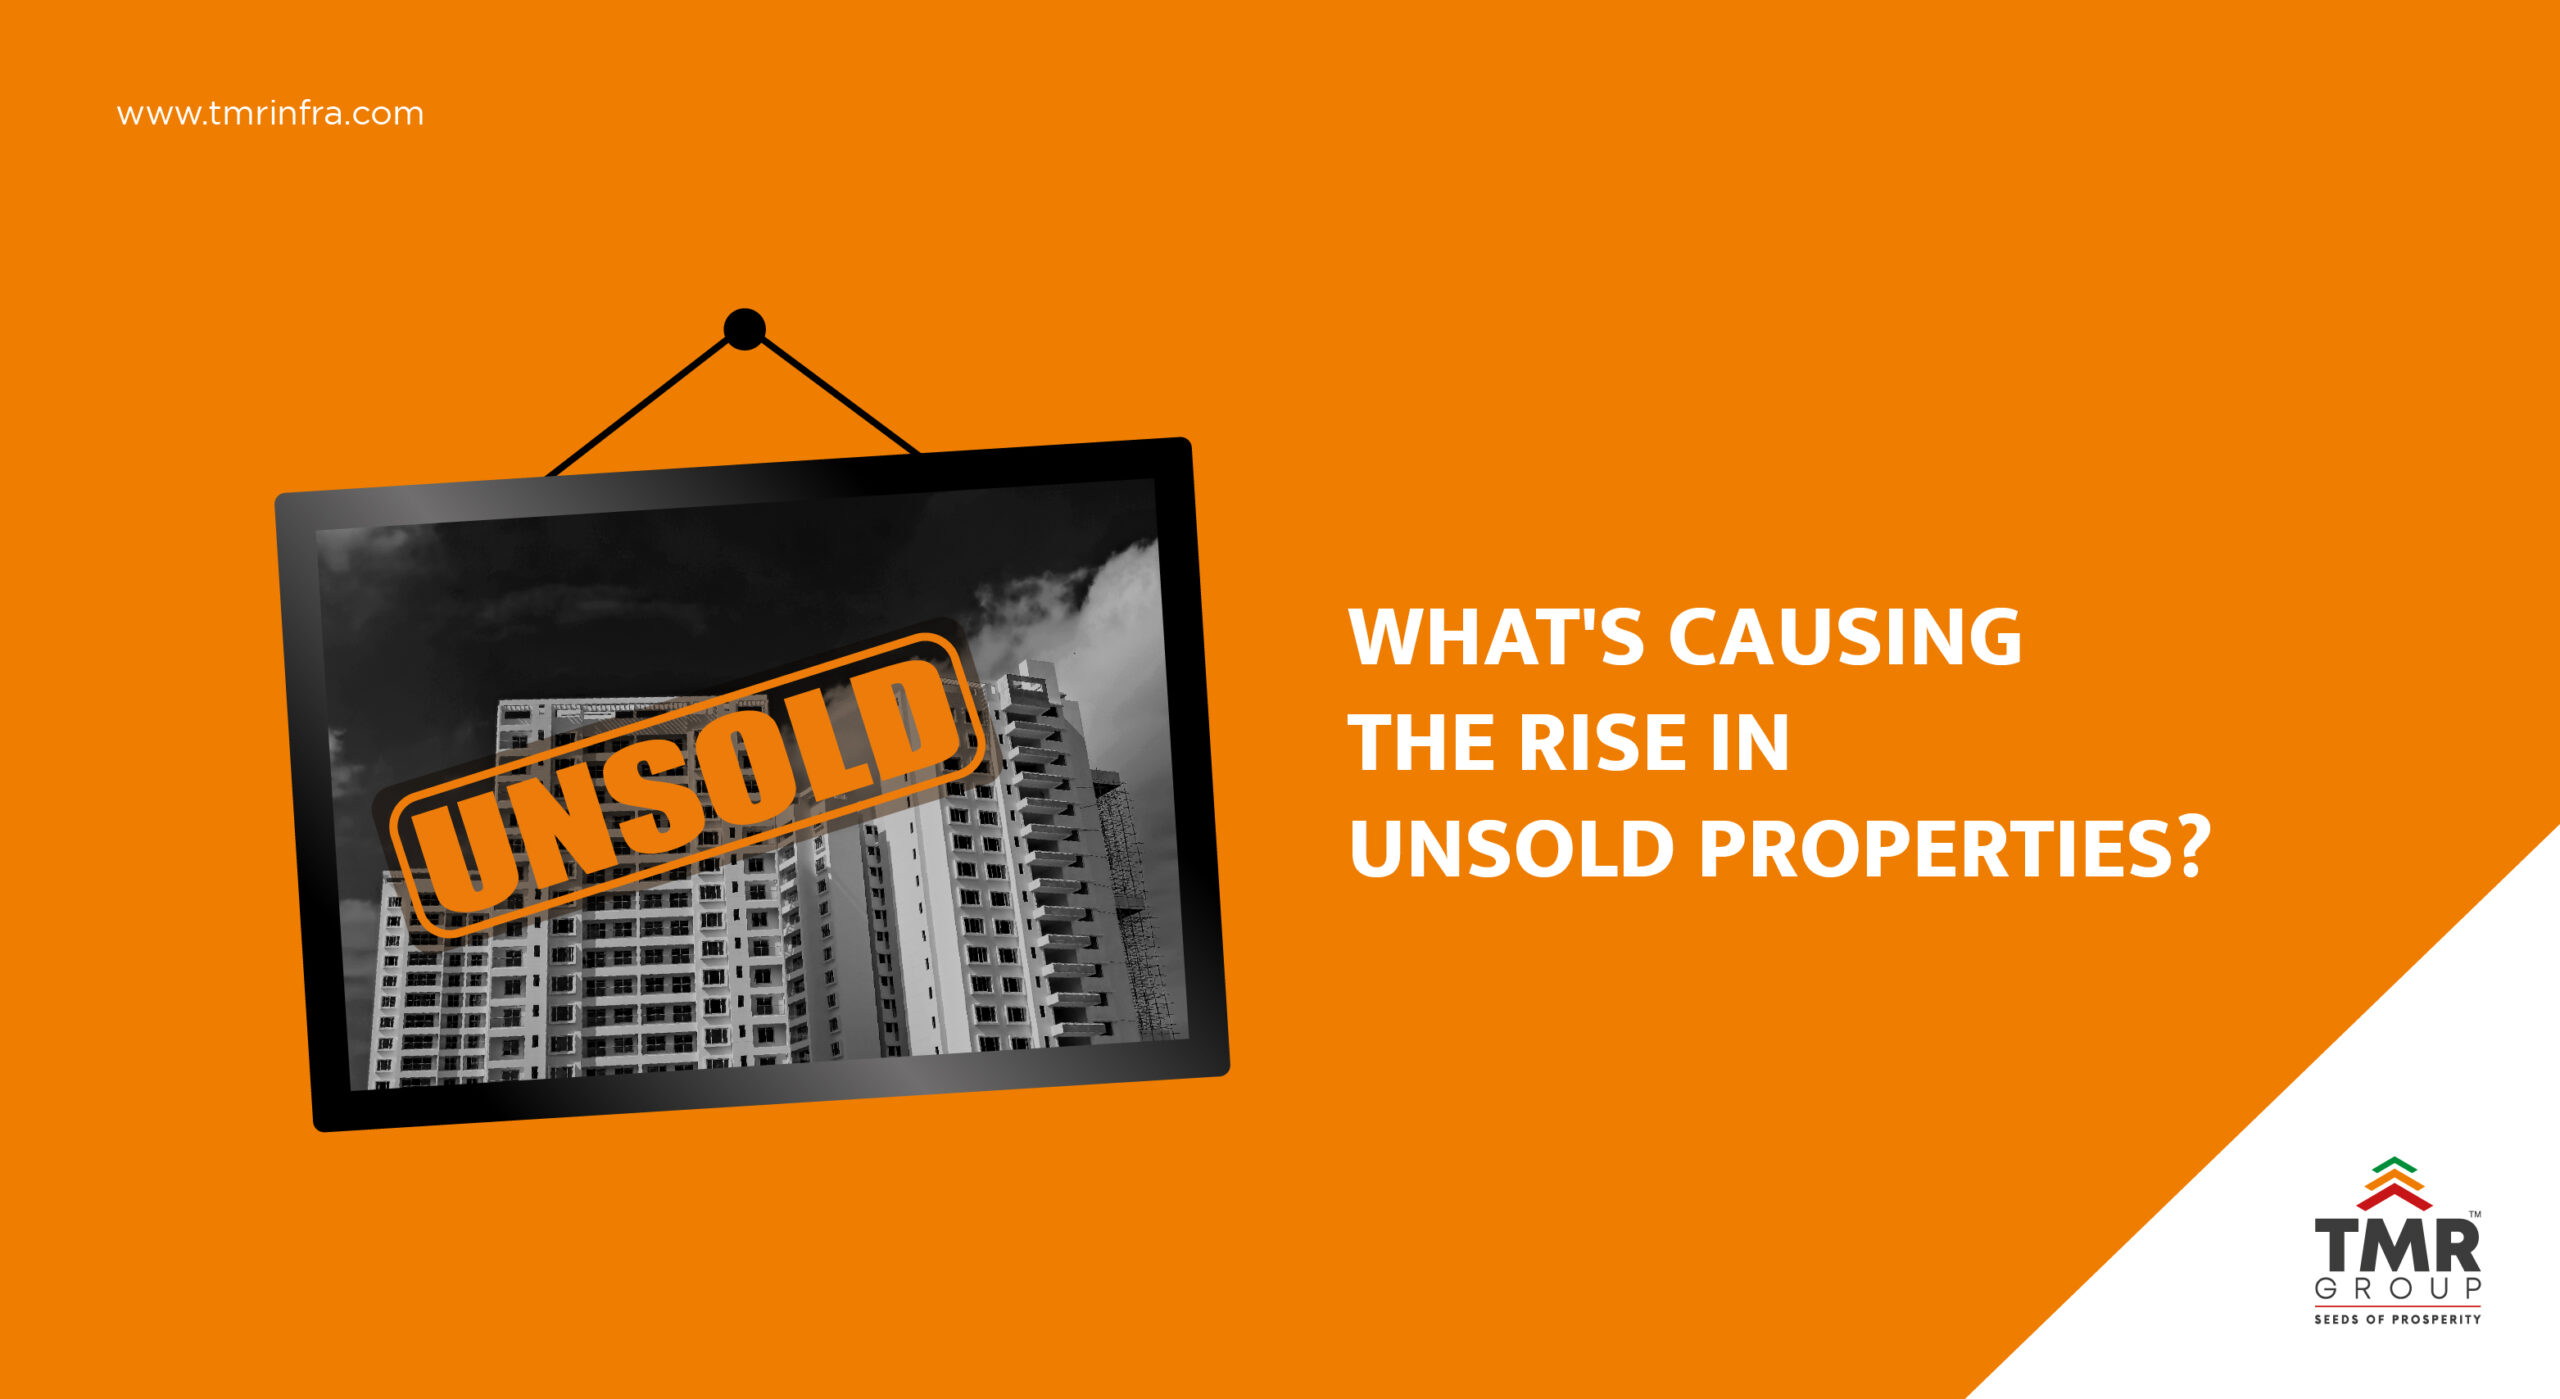 WHAT’S CAUSING THE RISE IN UNSOLD PROPERTIES? - Blogs